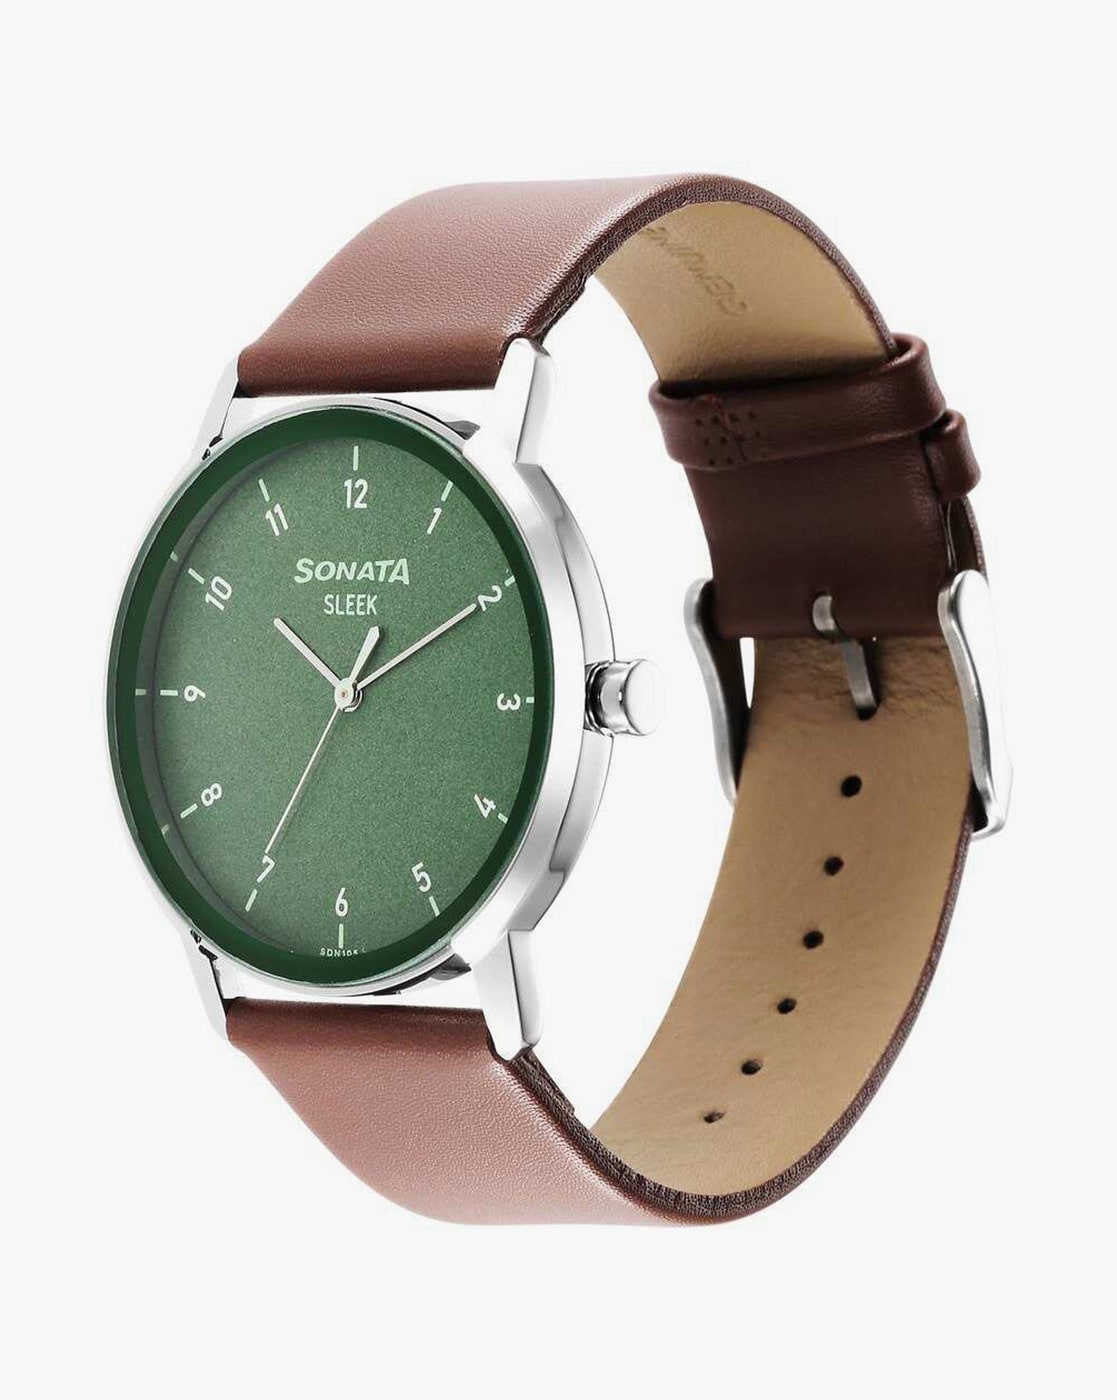 Sonata Watches - Step up your work fashion today with Sonata Sleek! With  its slim case, it gives you a neat formal look yet keeping it trendy for  your workplace. Check out